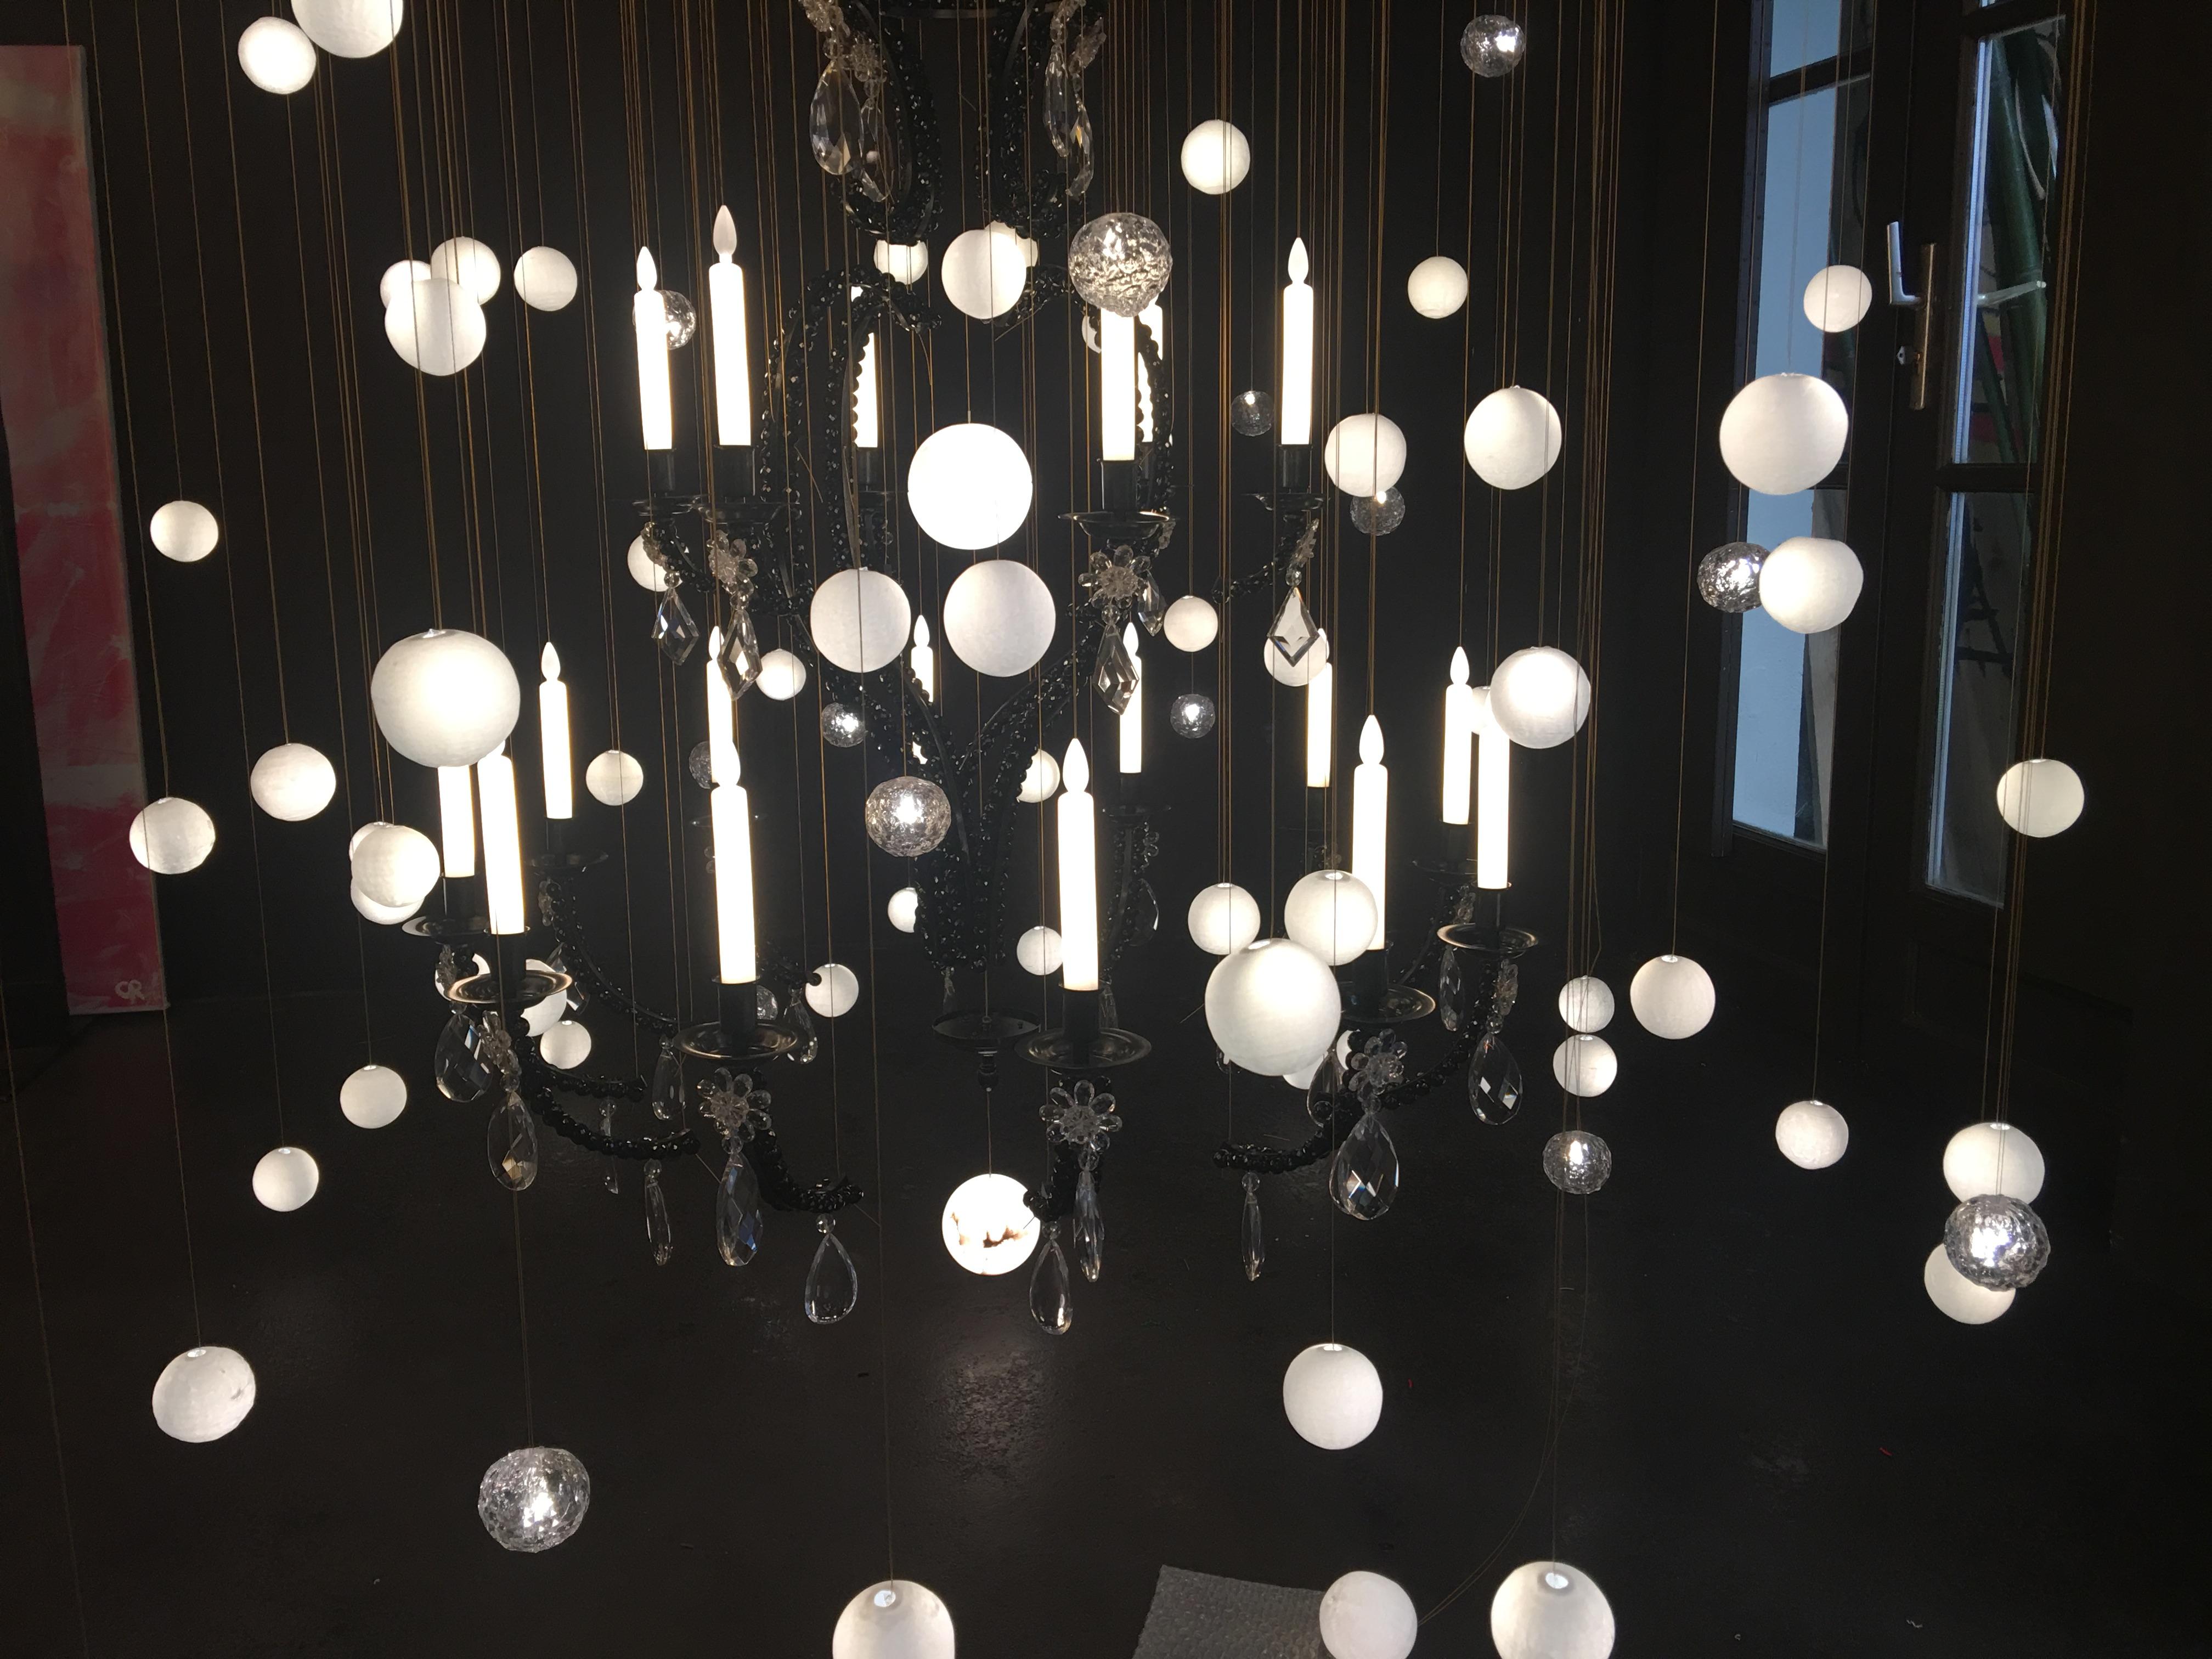 The Bespoke chandelier Le Merveilleux – Le black is designed by Sylvie Maréchal and by Jean Delisle and it is entirely manufactured in France. This chandelier is made in black painted steel and has 17 spheres in mouth blown glass, 64 spheres in